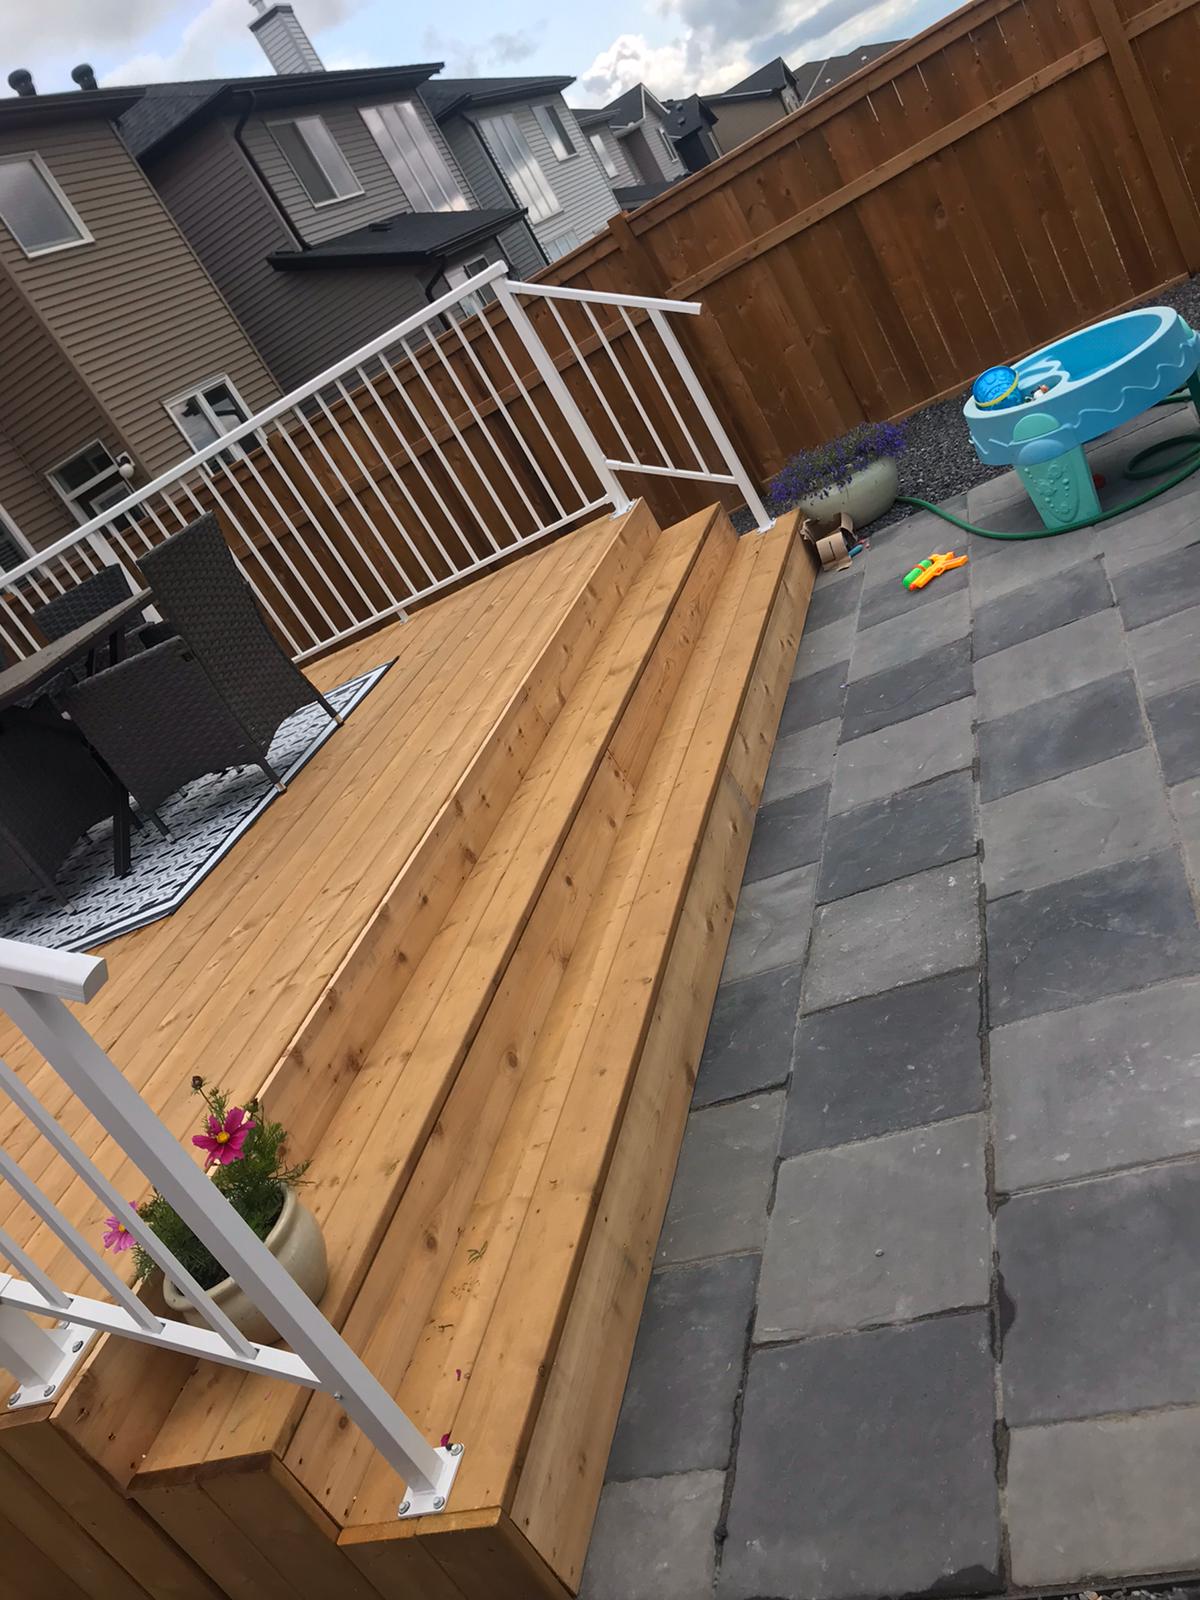 wood stairs landscaping landing onto paving stone patio calgary landscaping